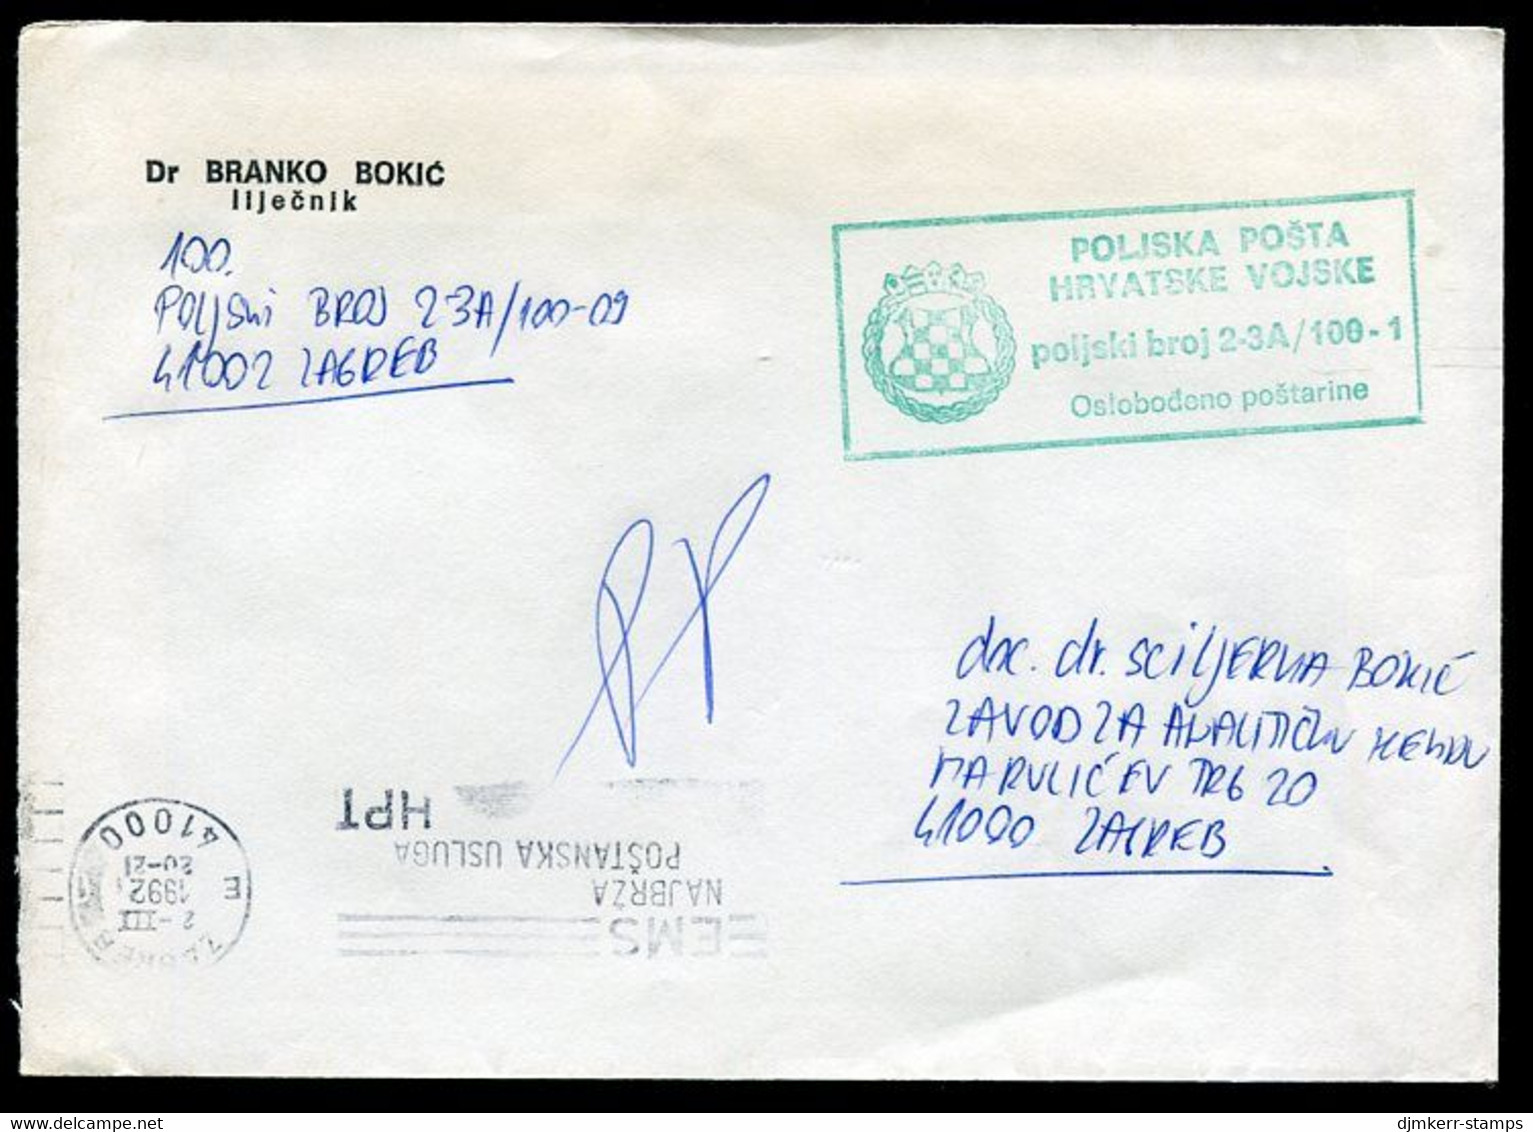 CROATIA 1992 Stampless Cover With Field Post Office Cachet Sent During War With Serbia. - Kroatien